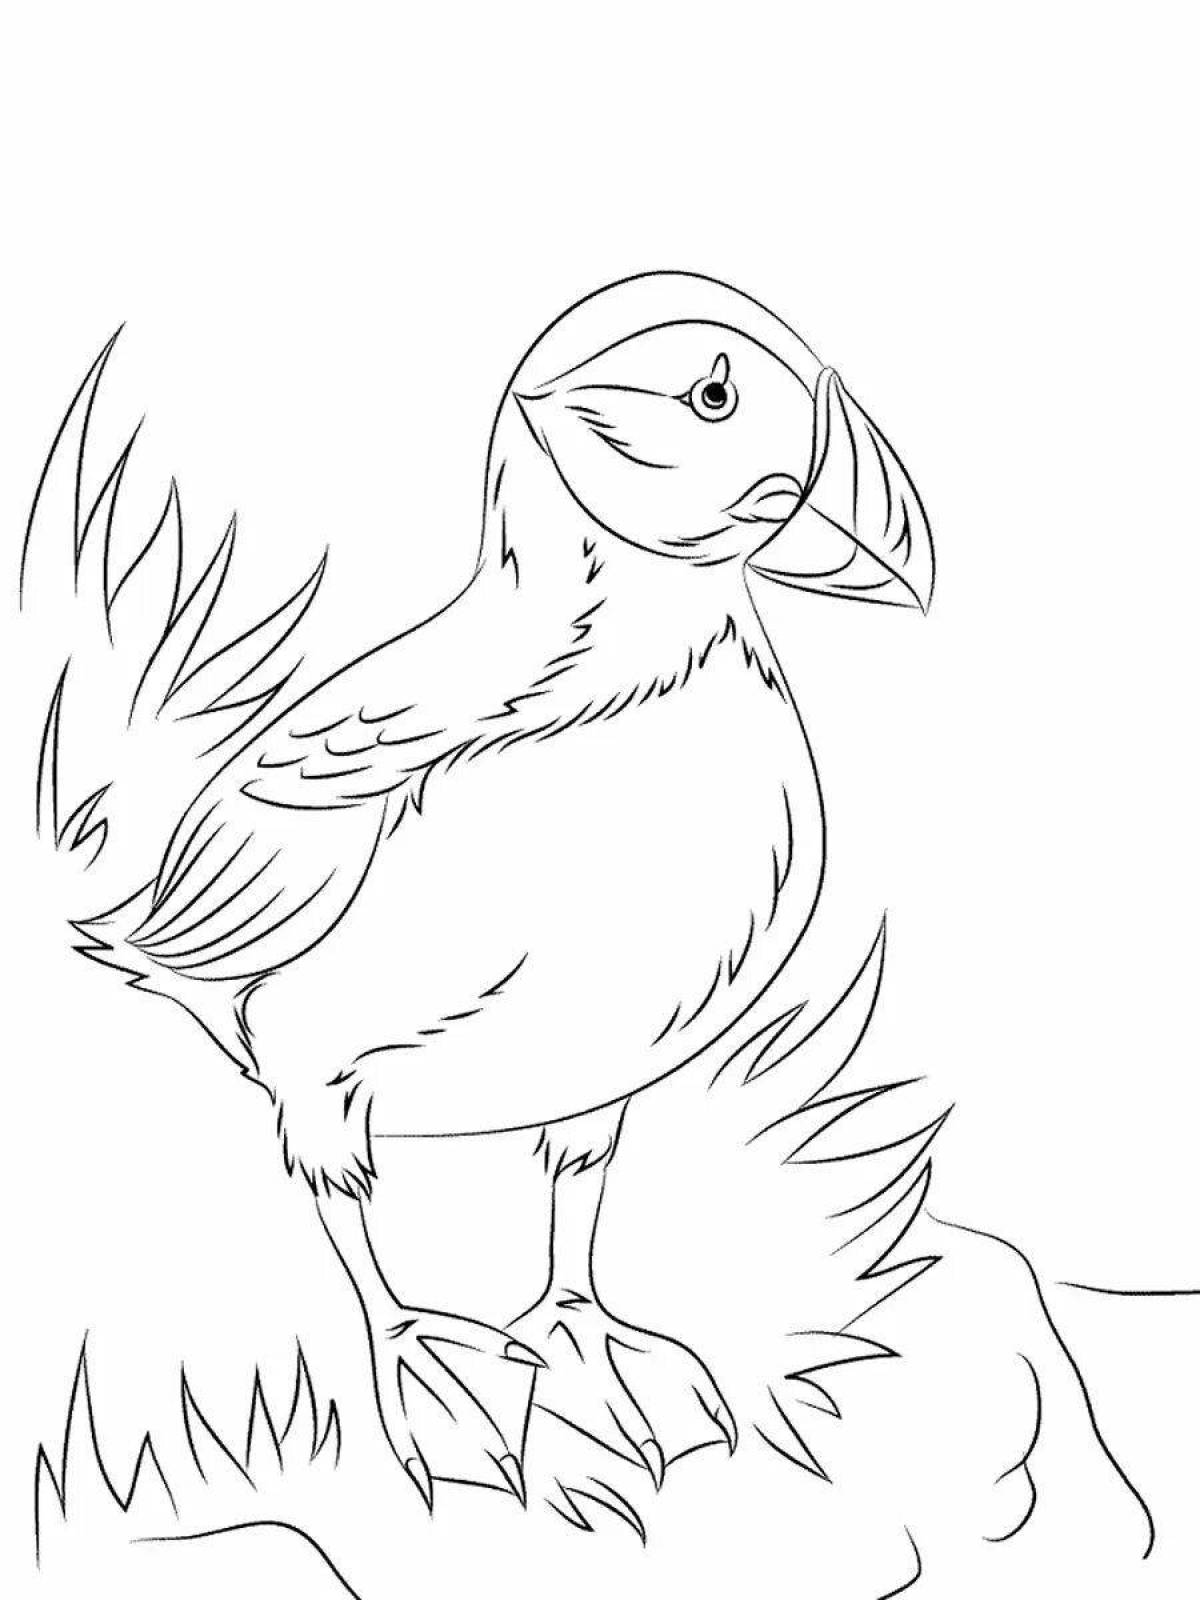 Coloring page magnificent puffin bird